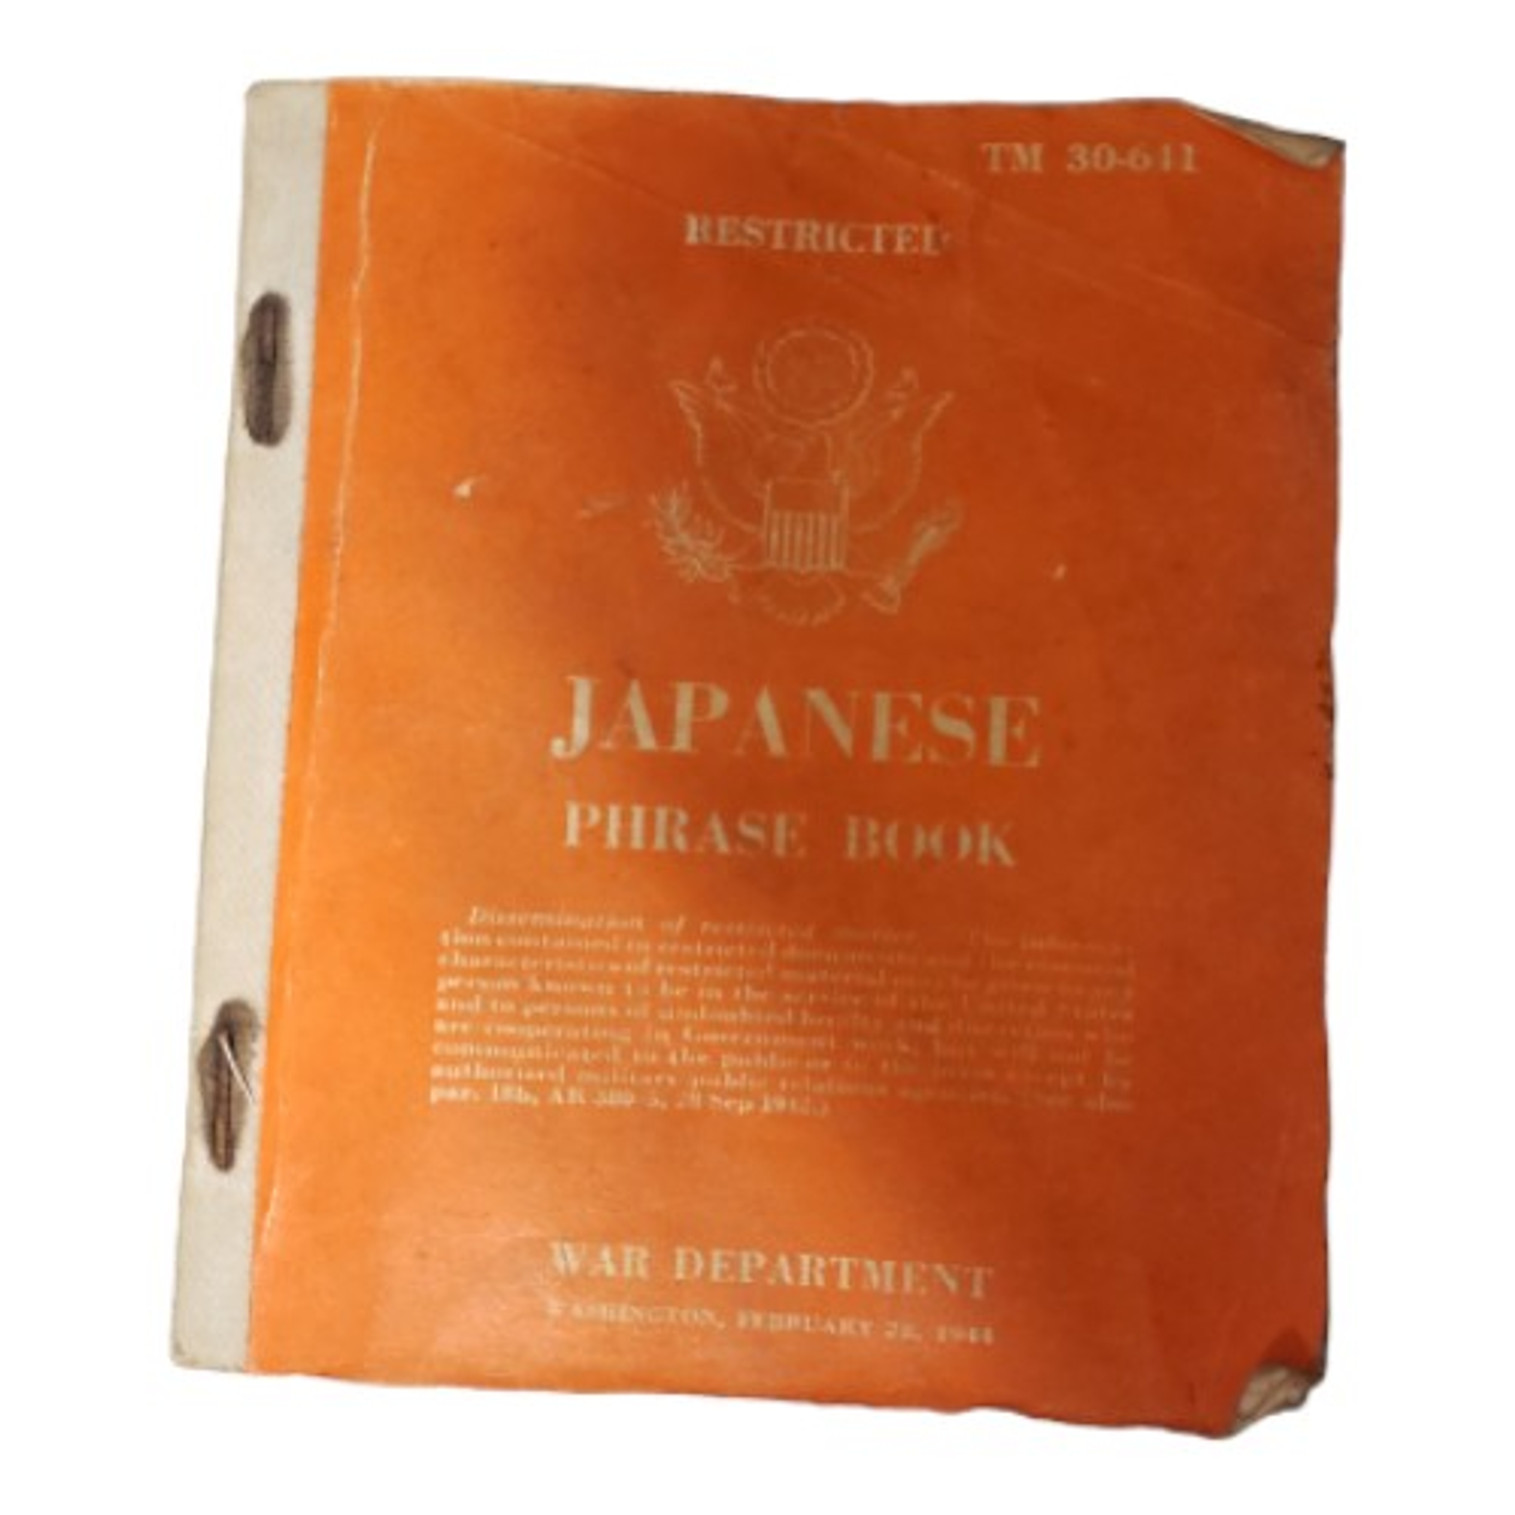 WW2 Japanese Phrase Book Dated February 26 1944